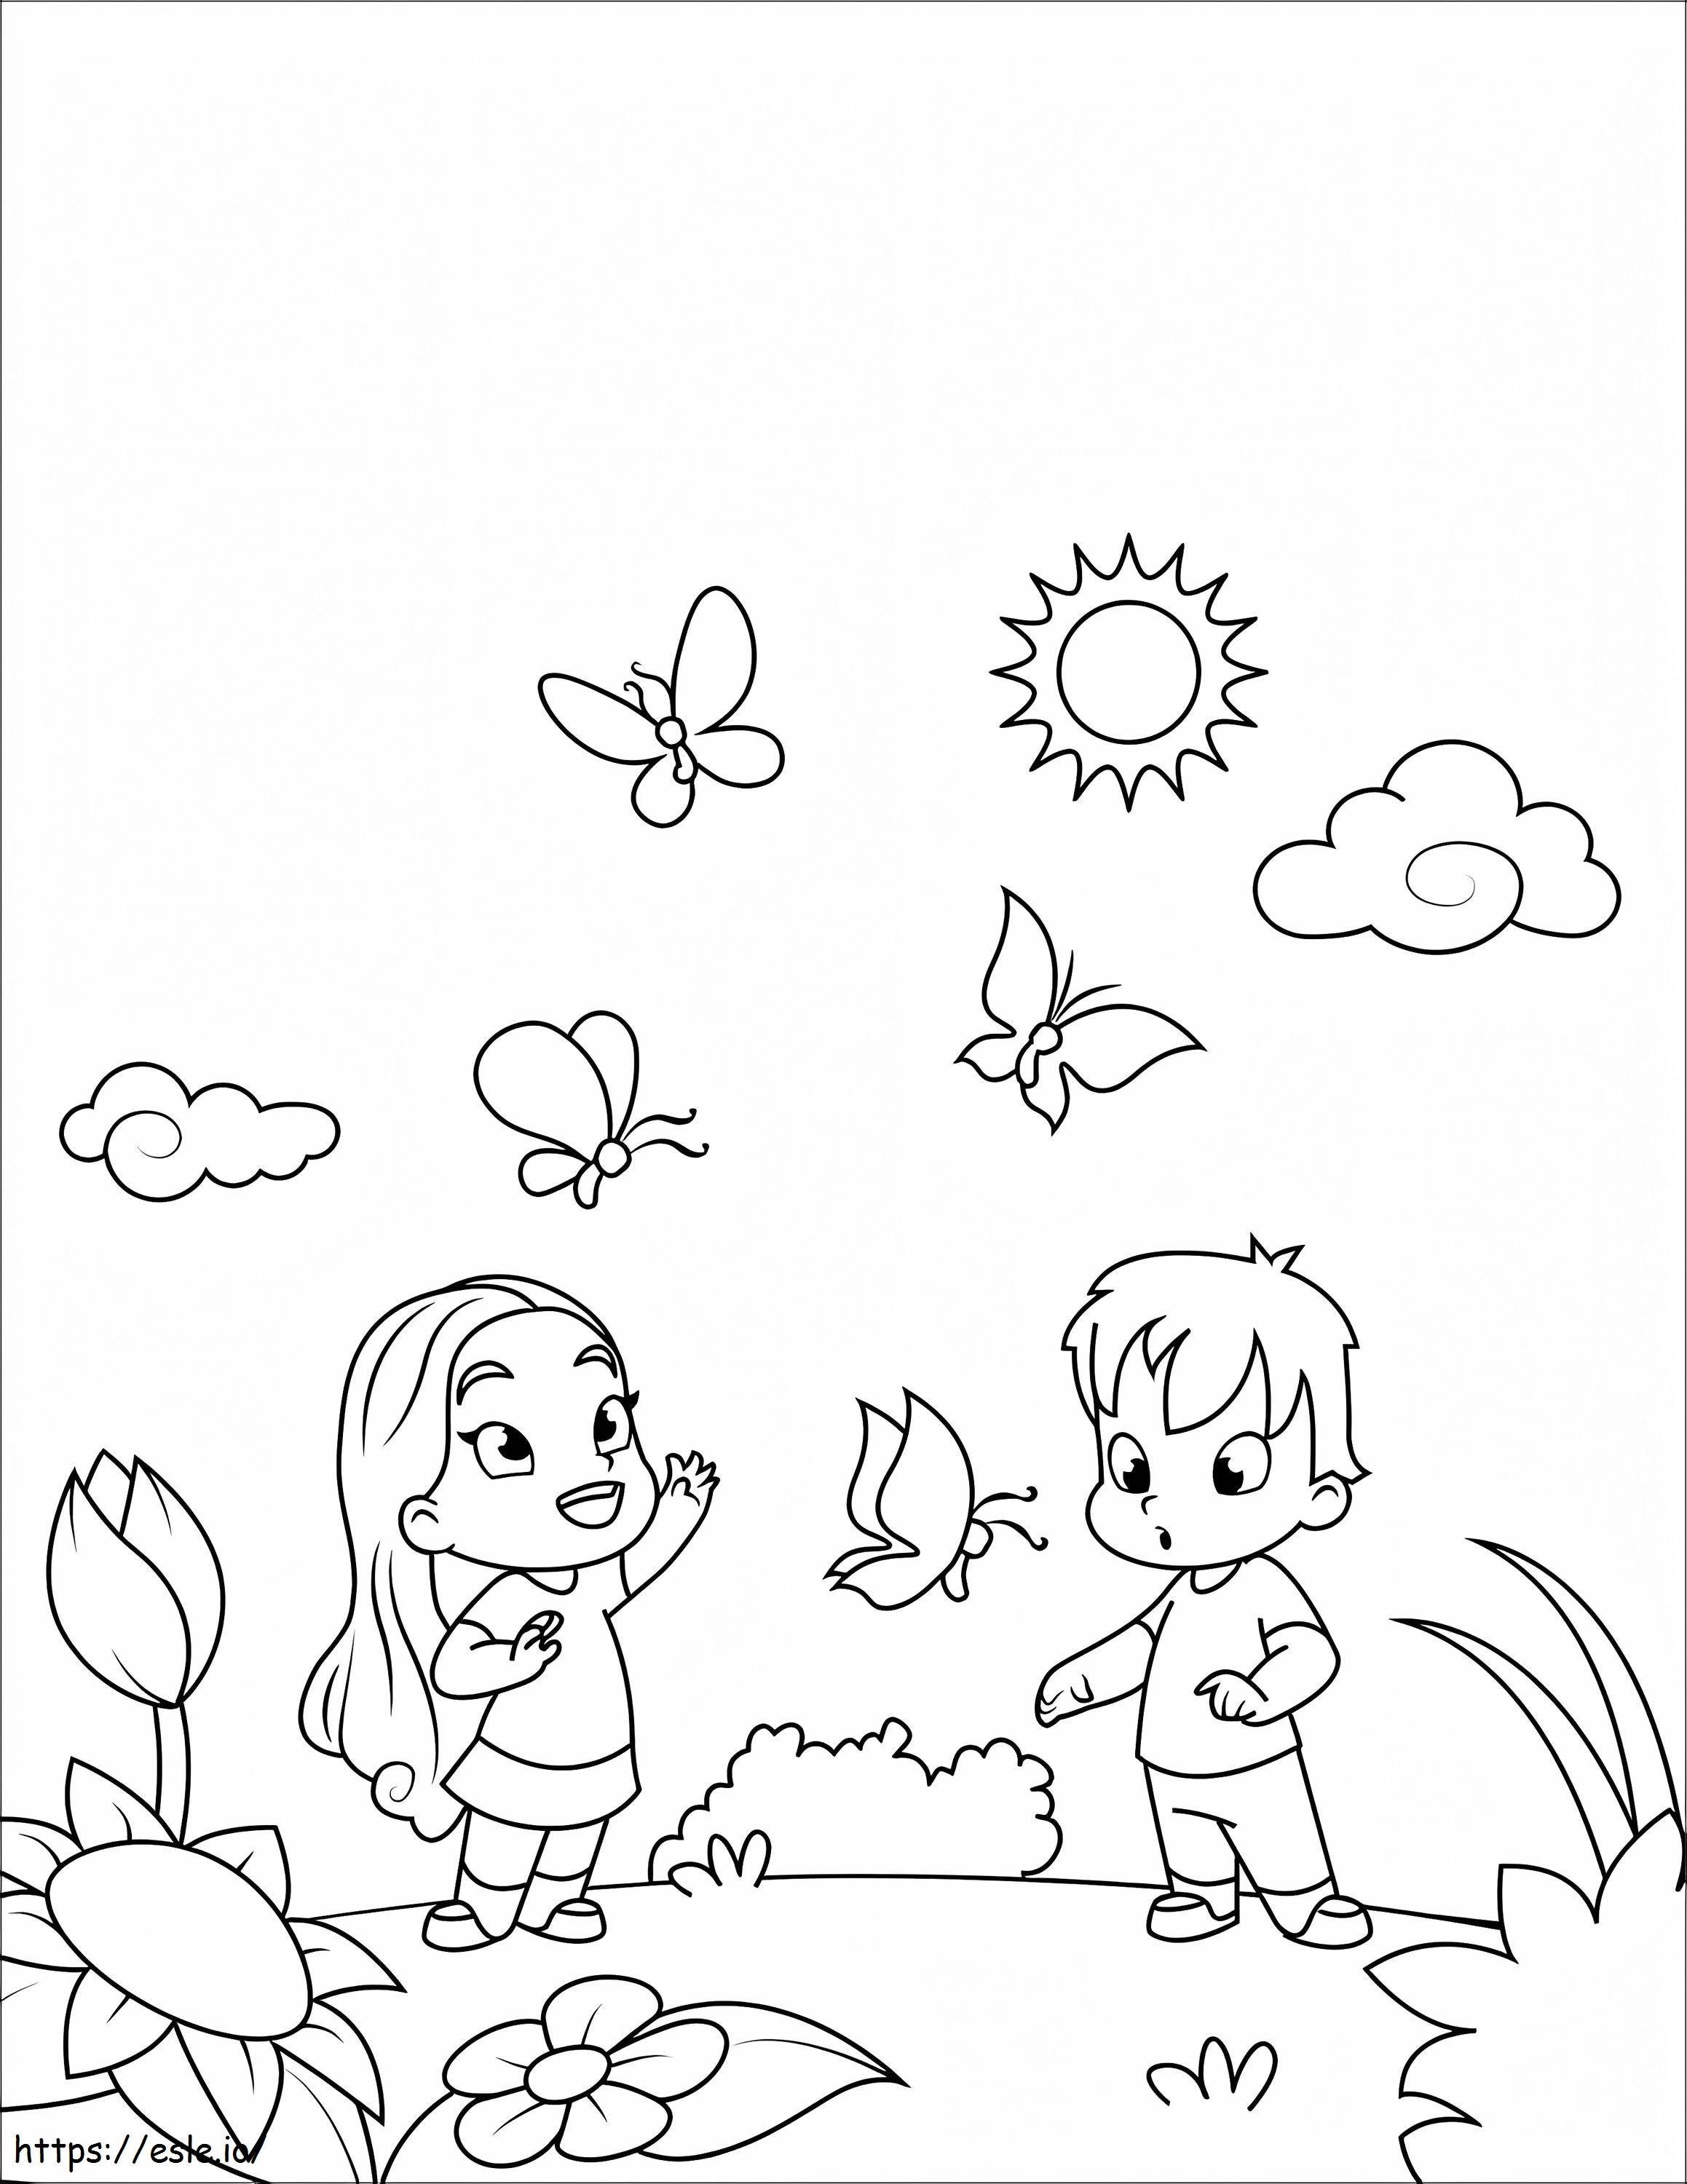 Cute Spring Scenery coloring page